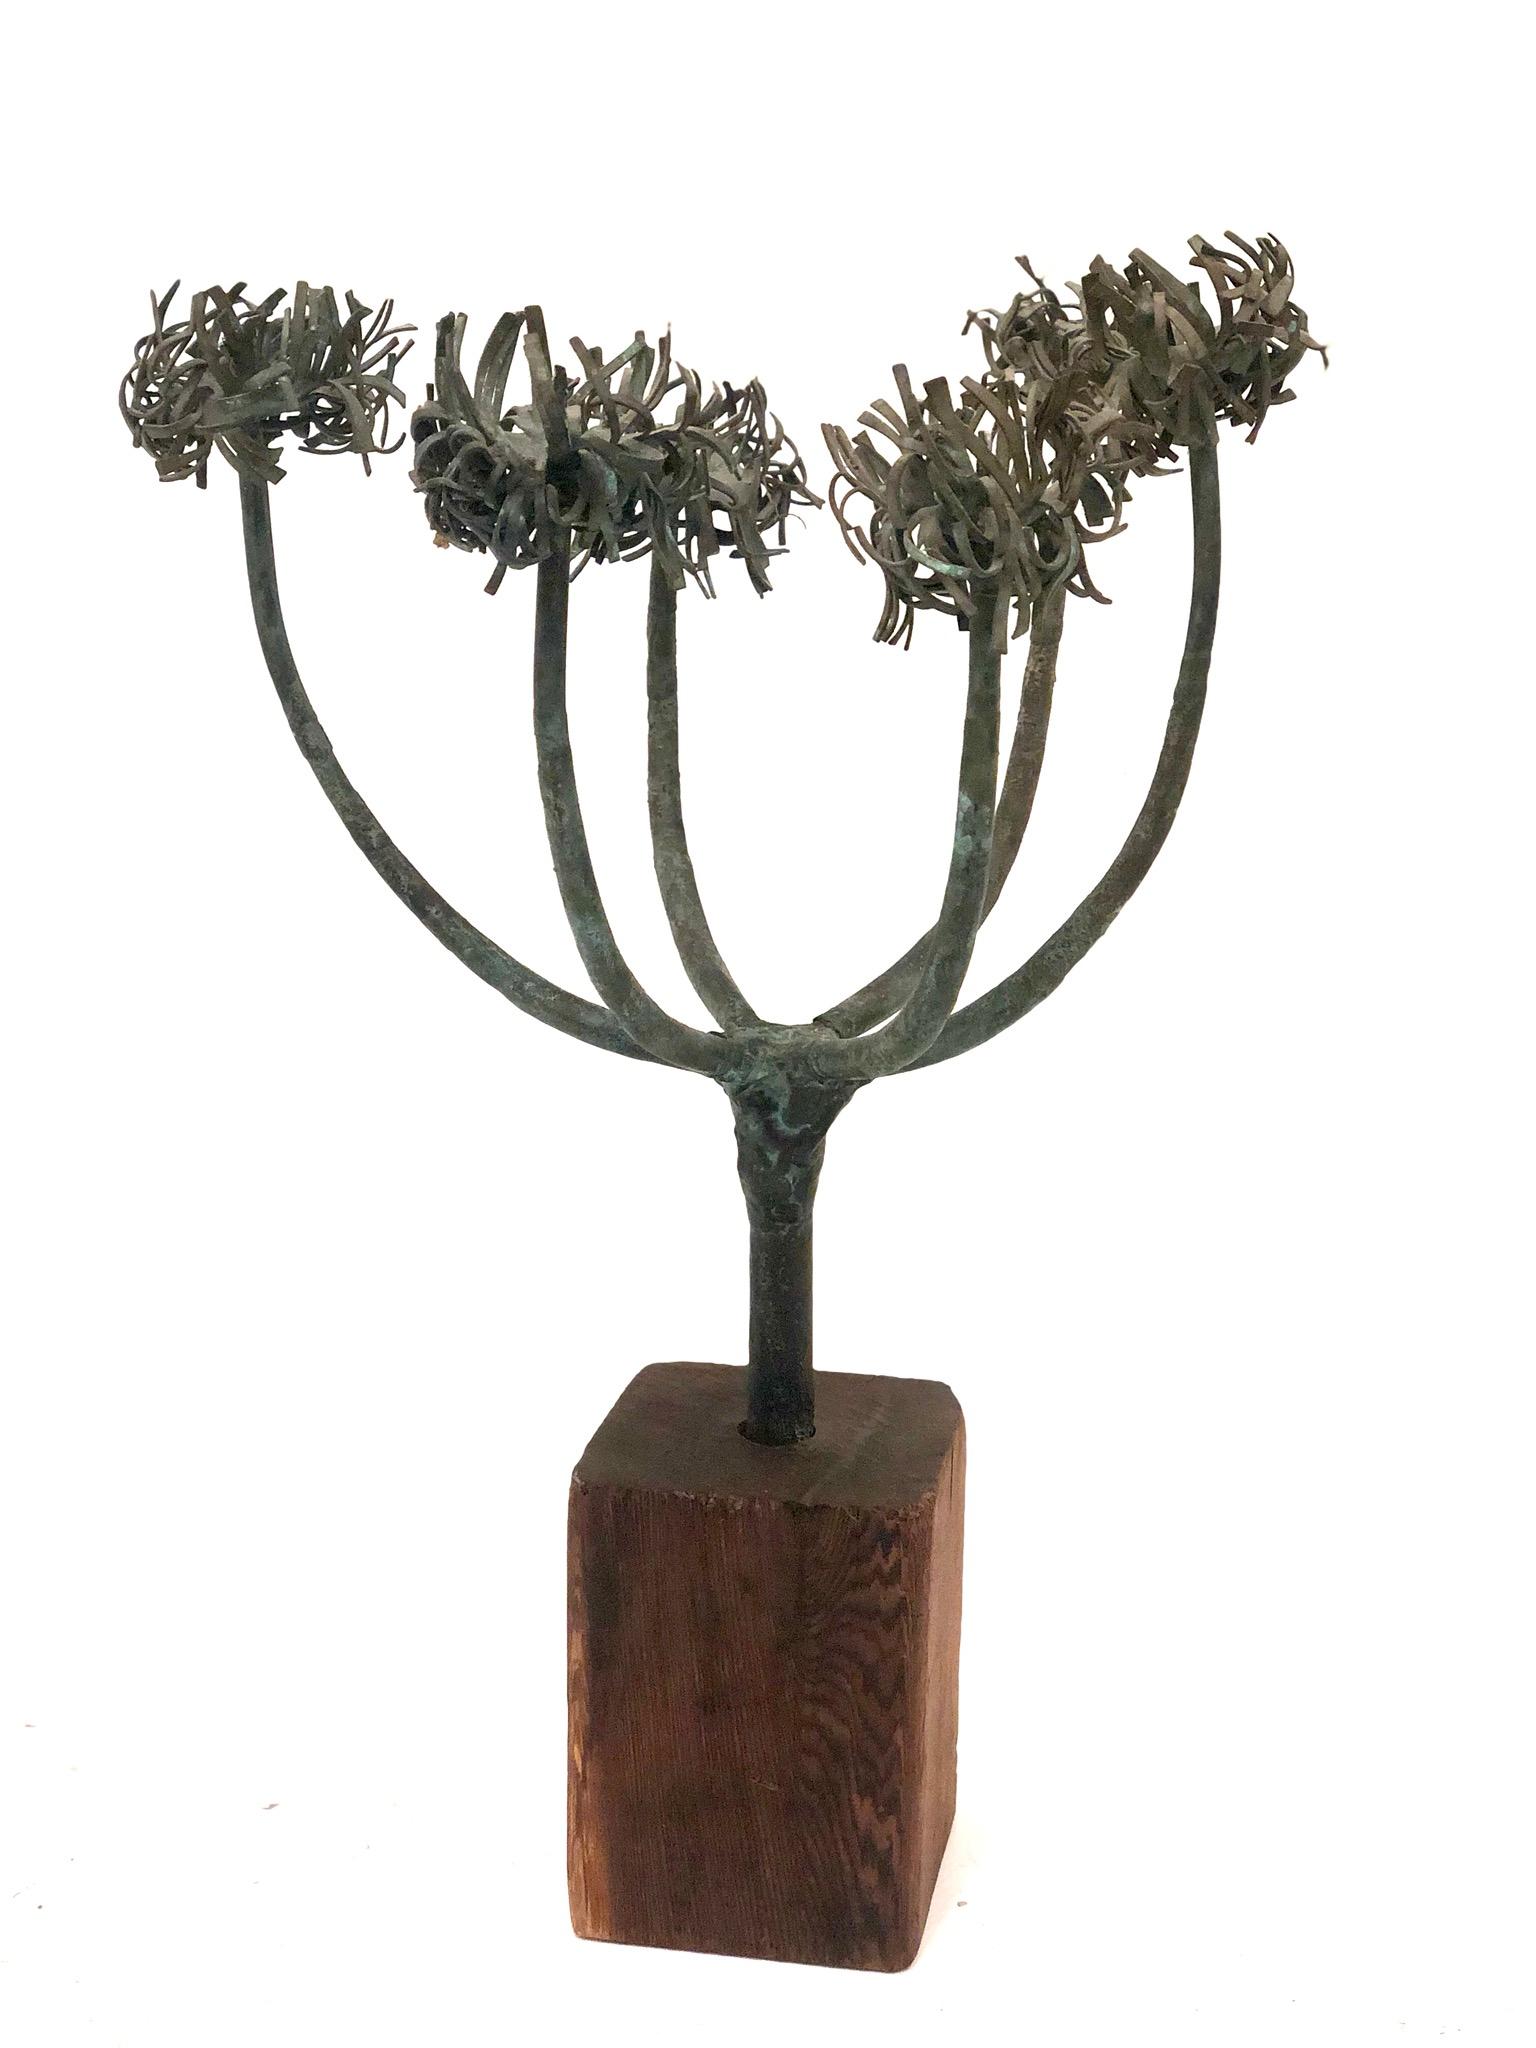 Brutalist candelabra designed and made by San Diego artist Robert Trout, California design from the 1960s , sitting on square solid wood patinated base.